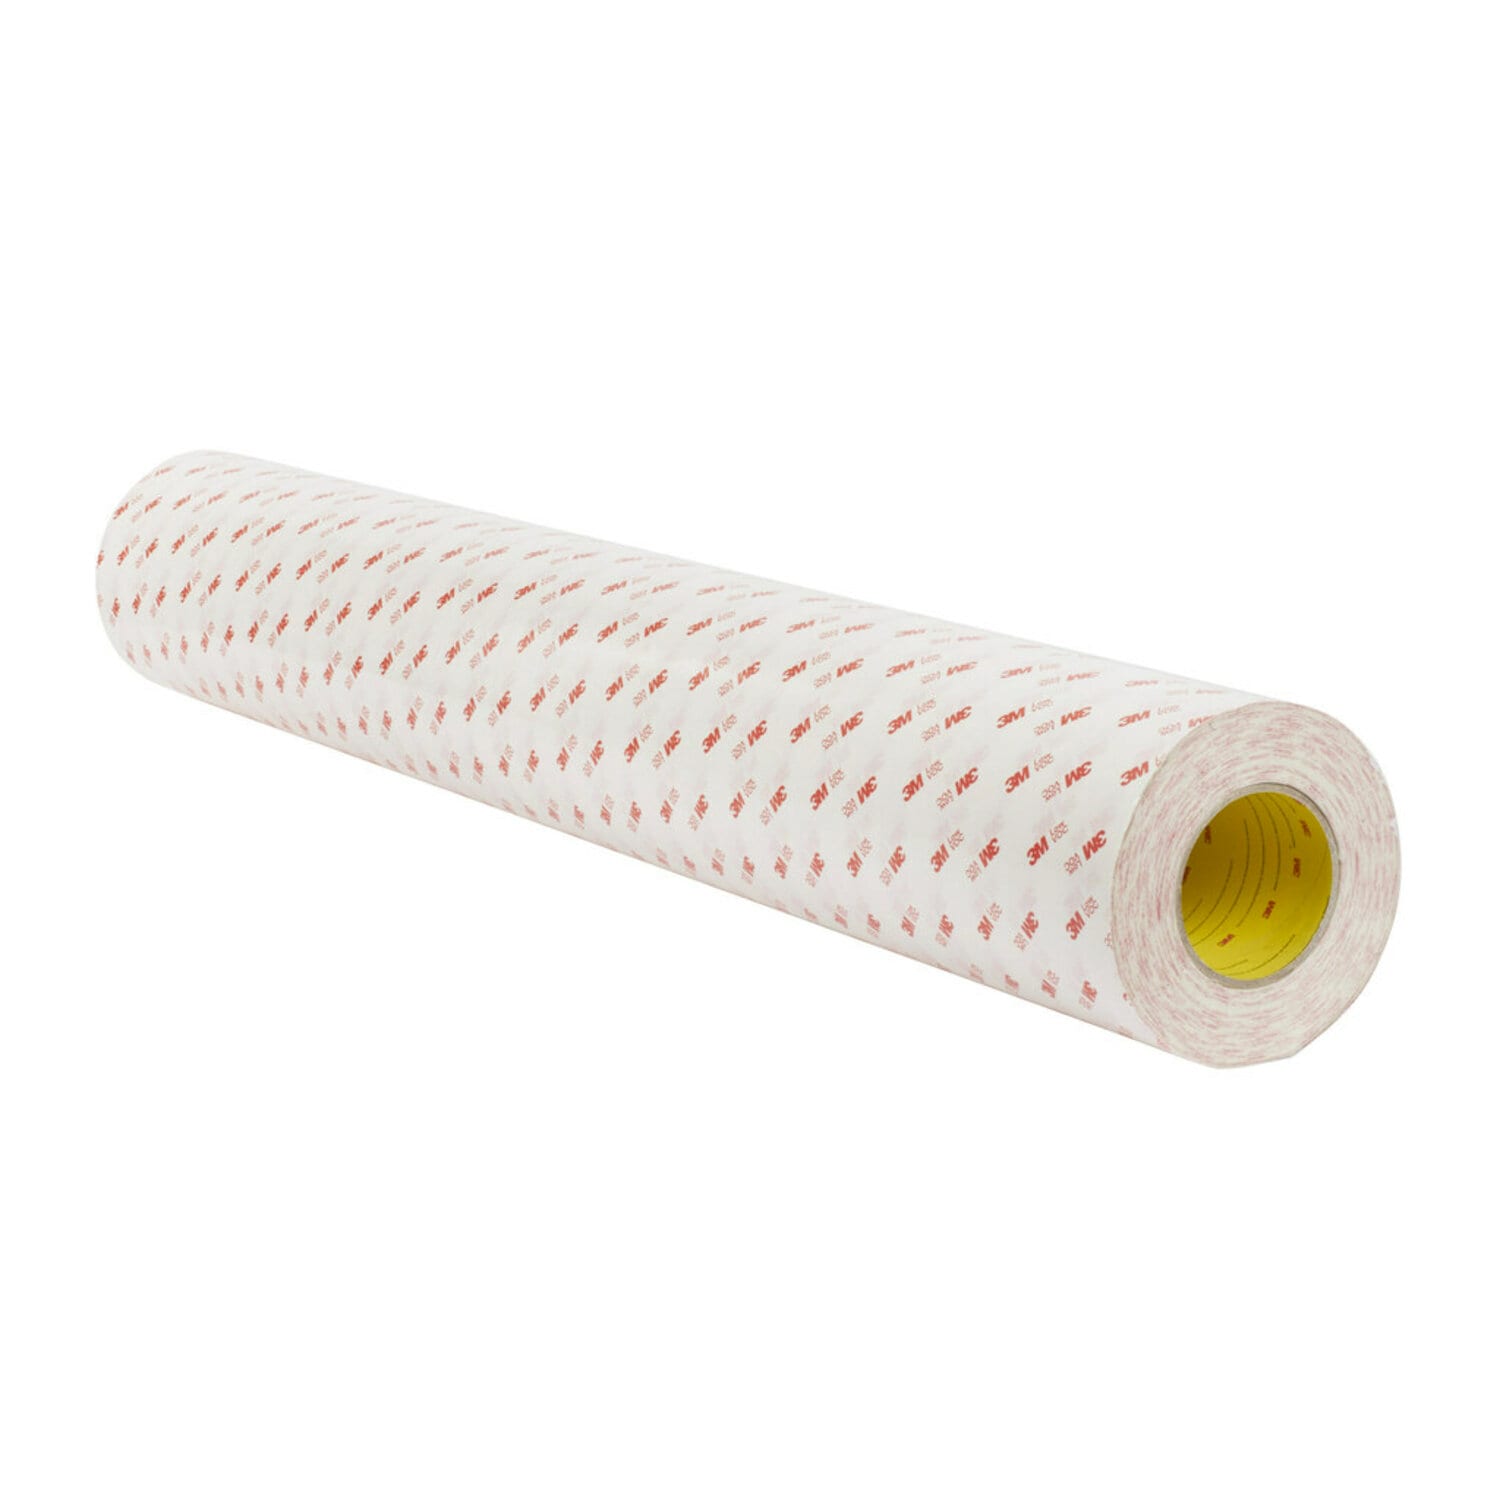 3M Low VOC Double Coated Tissue Tape 99015LVC, Clear, 1000 mm x 50 M, 0.15 mm, 1 Roll/ Case